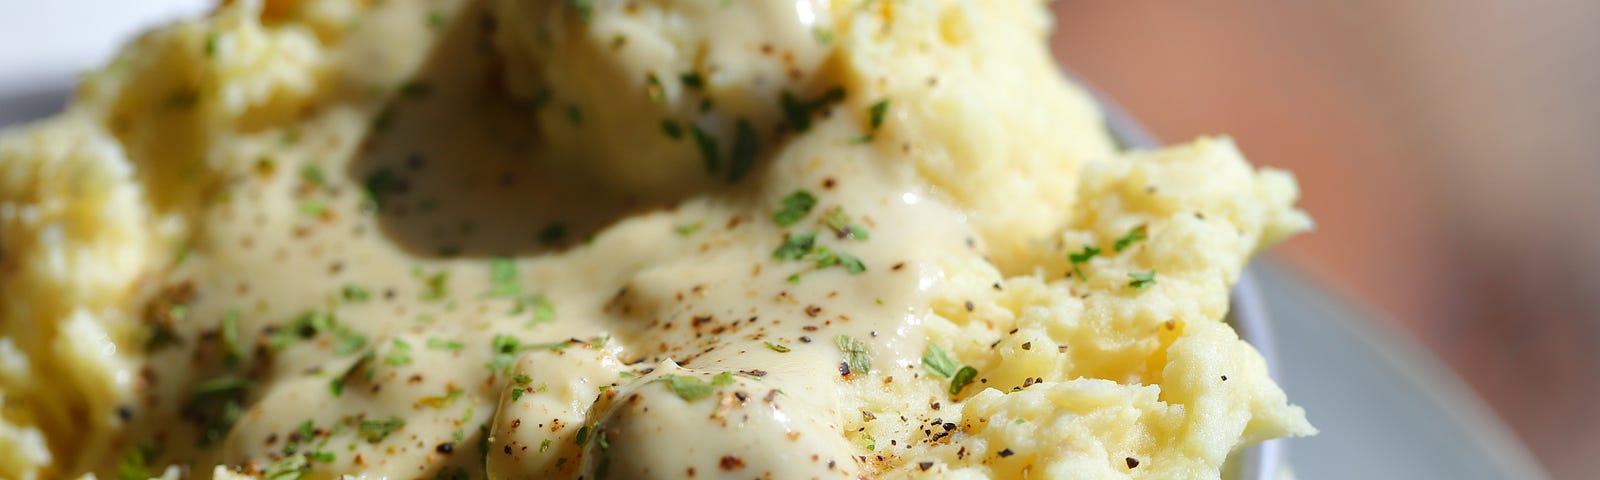 Plant-based delicious and healthy mashed potatoes & gravy. Everyday comfort food for meal planning.